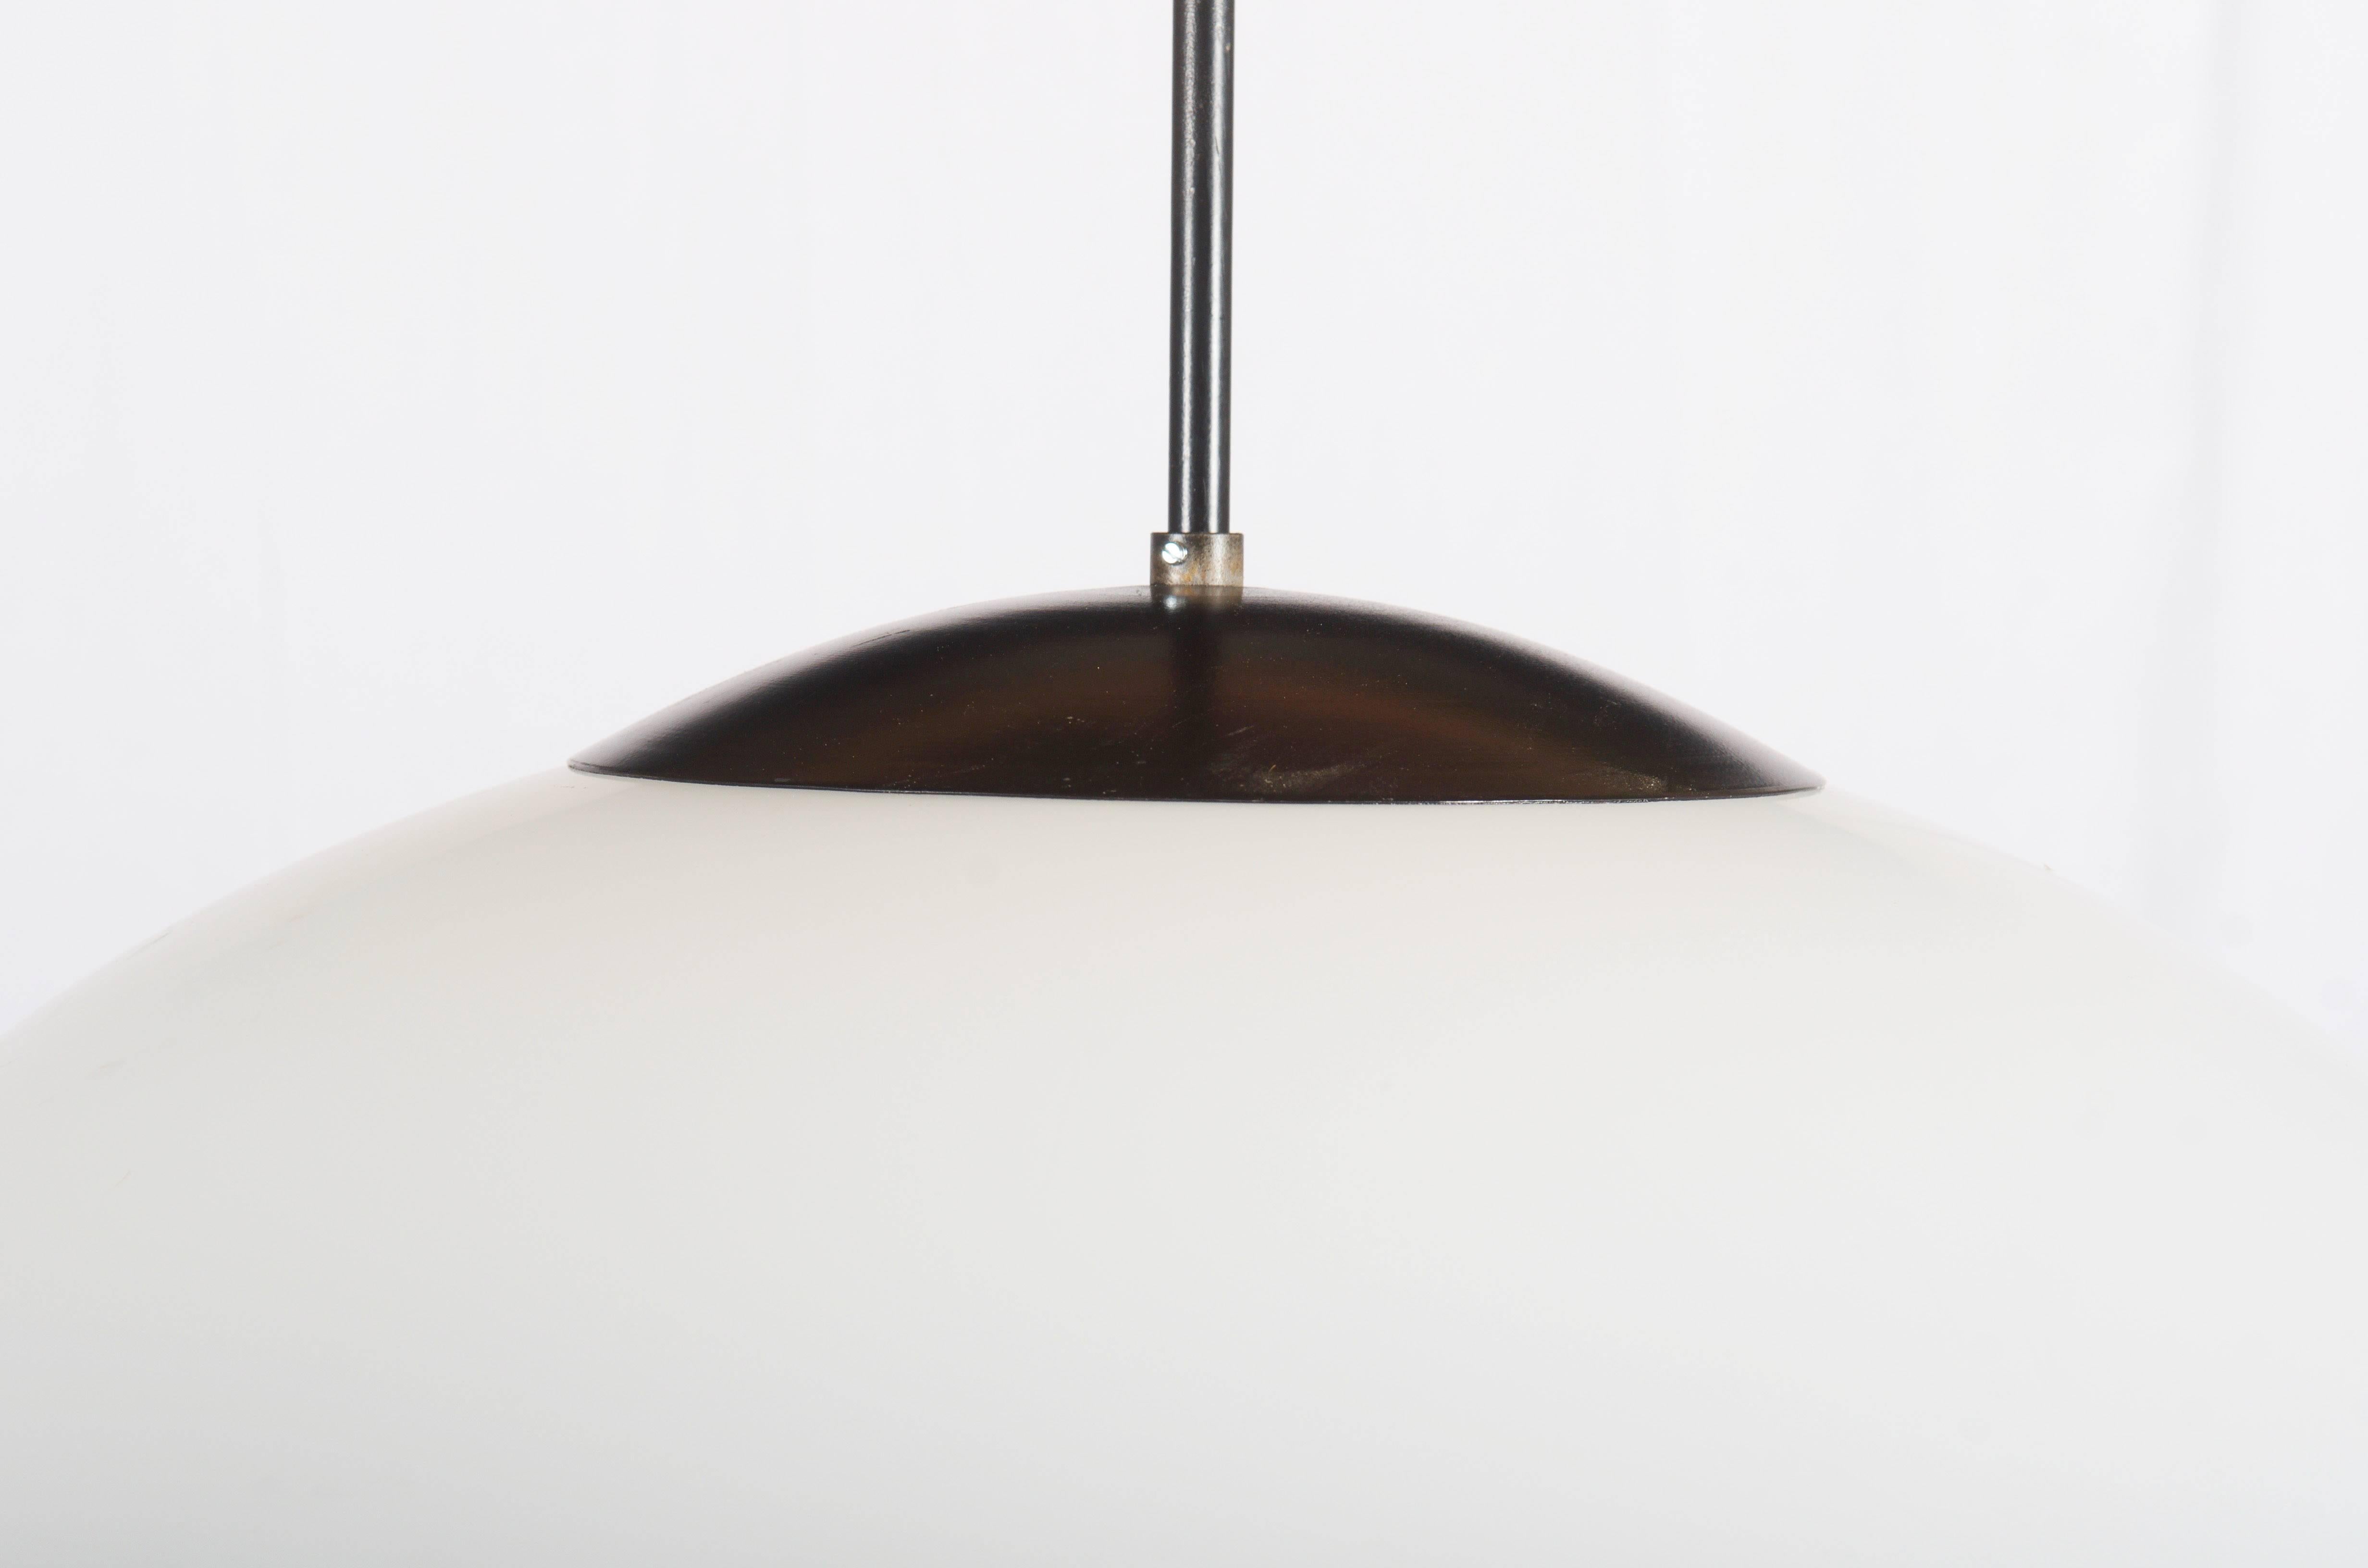 Steel hardware black pained with opaline glass shade in ellipsoid form.
From the 1970s.